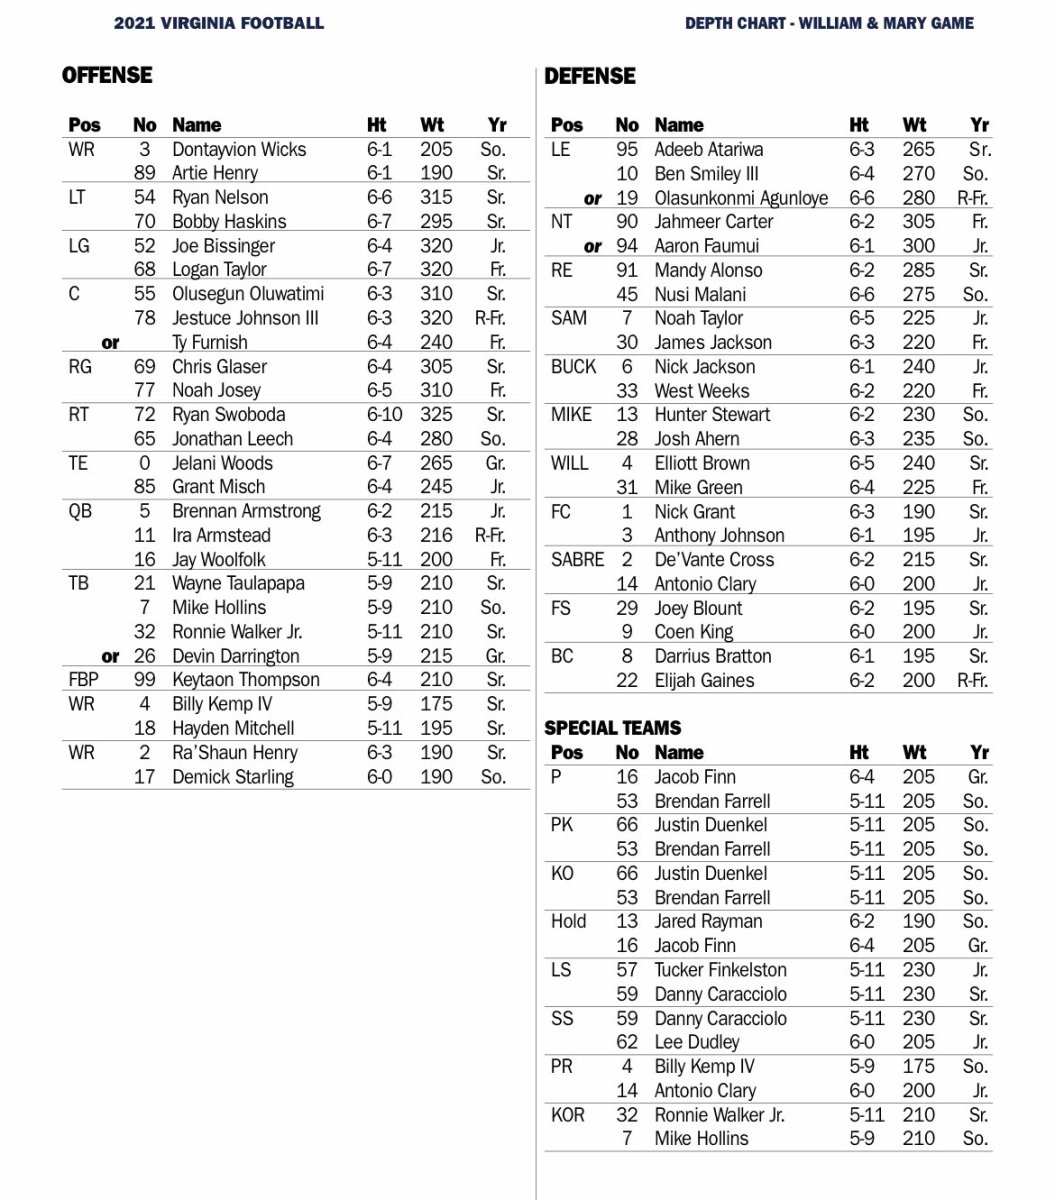 Virginia Cavaliers football depth chart for Saturday's season-opening game against William & Mary